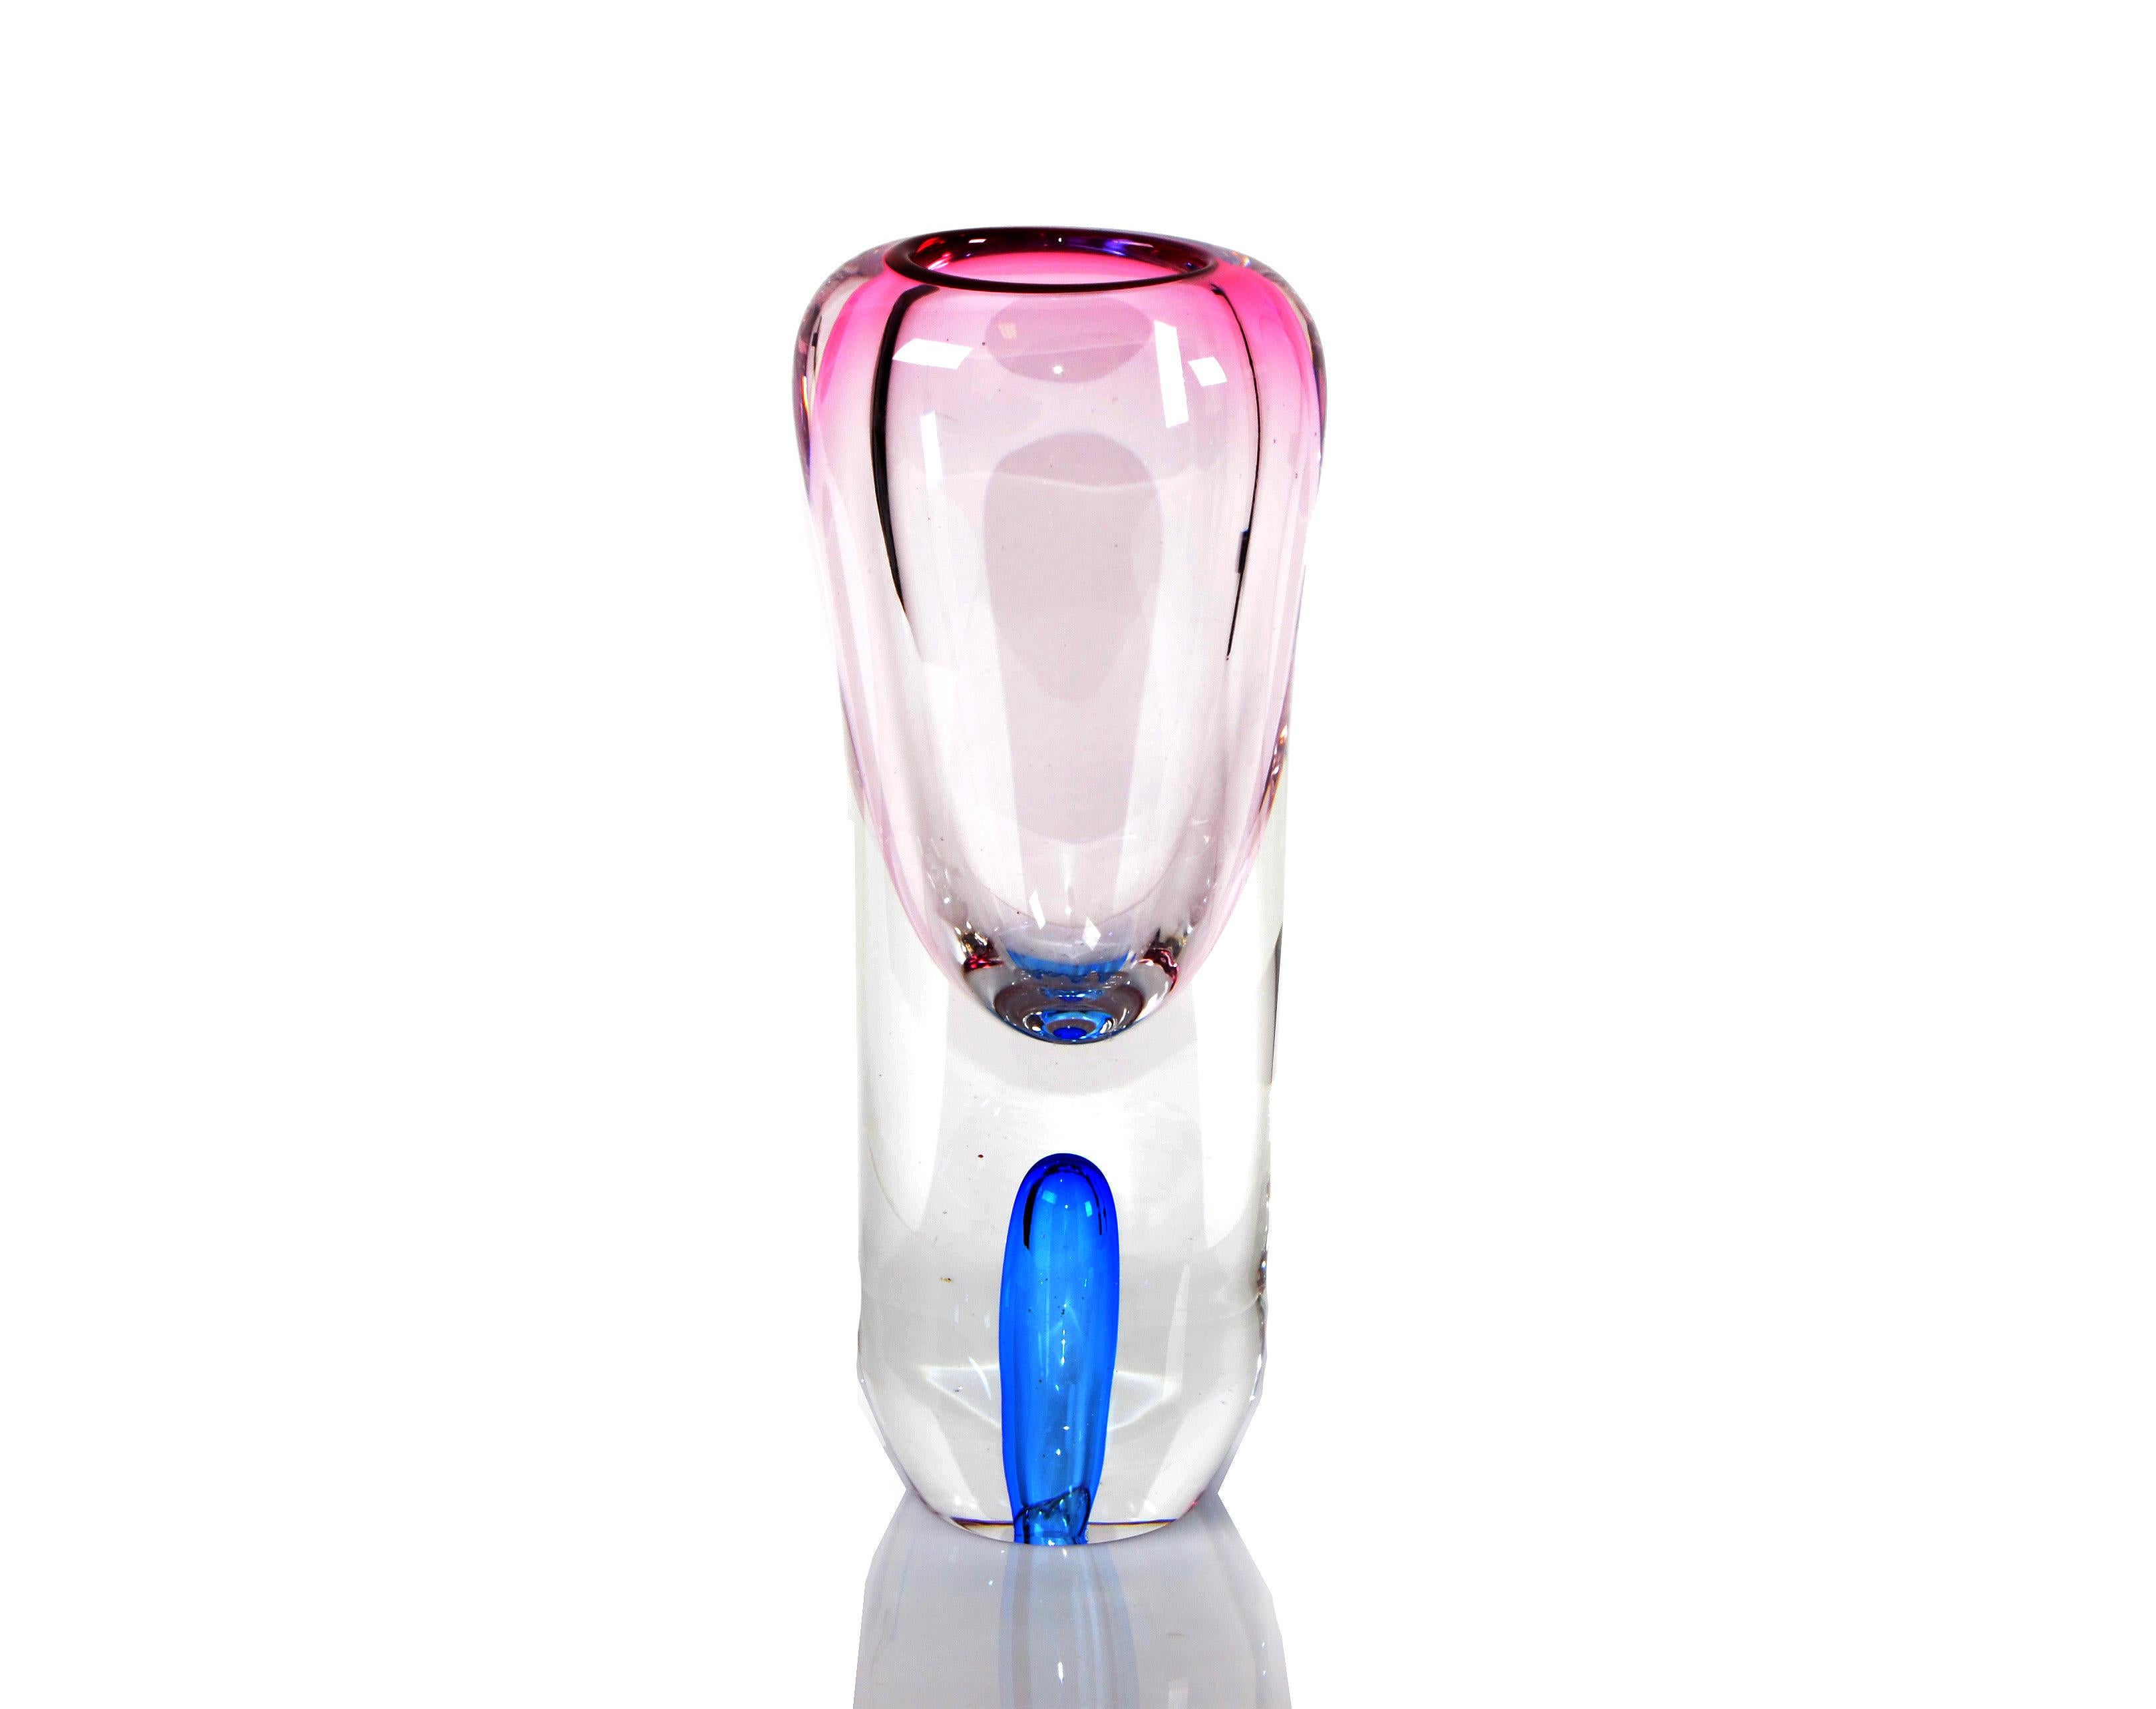 Murano reversible blown art glass vase in pink, blue and transparent glass from Italy.
The pink opening with 2 inches width is for a little bouquet and the blue opening for one single flower.
Mid-Century Modern unique glass art very elegant and